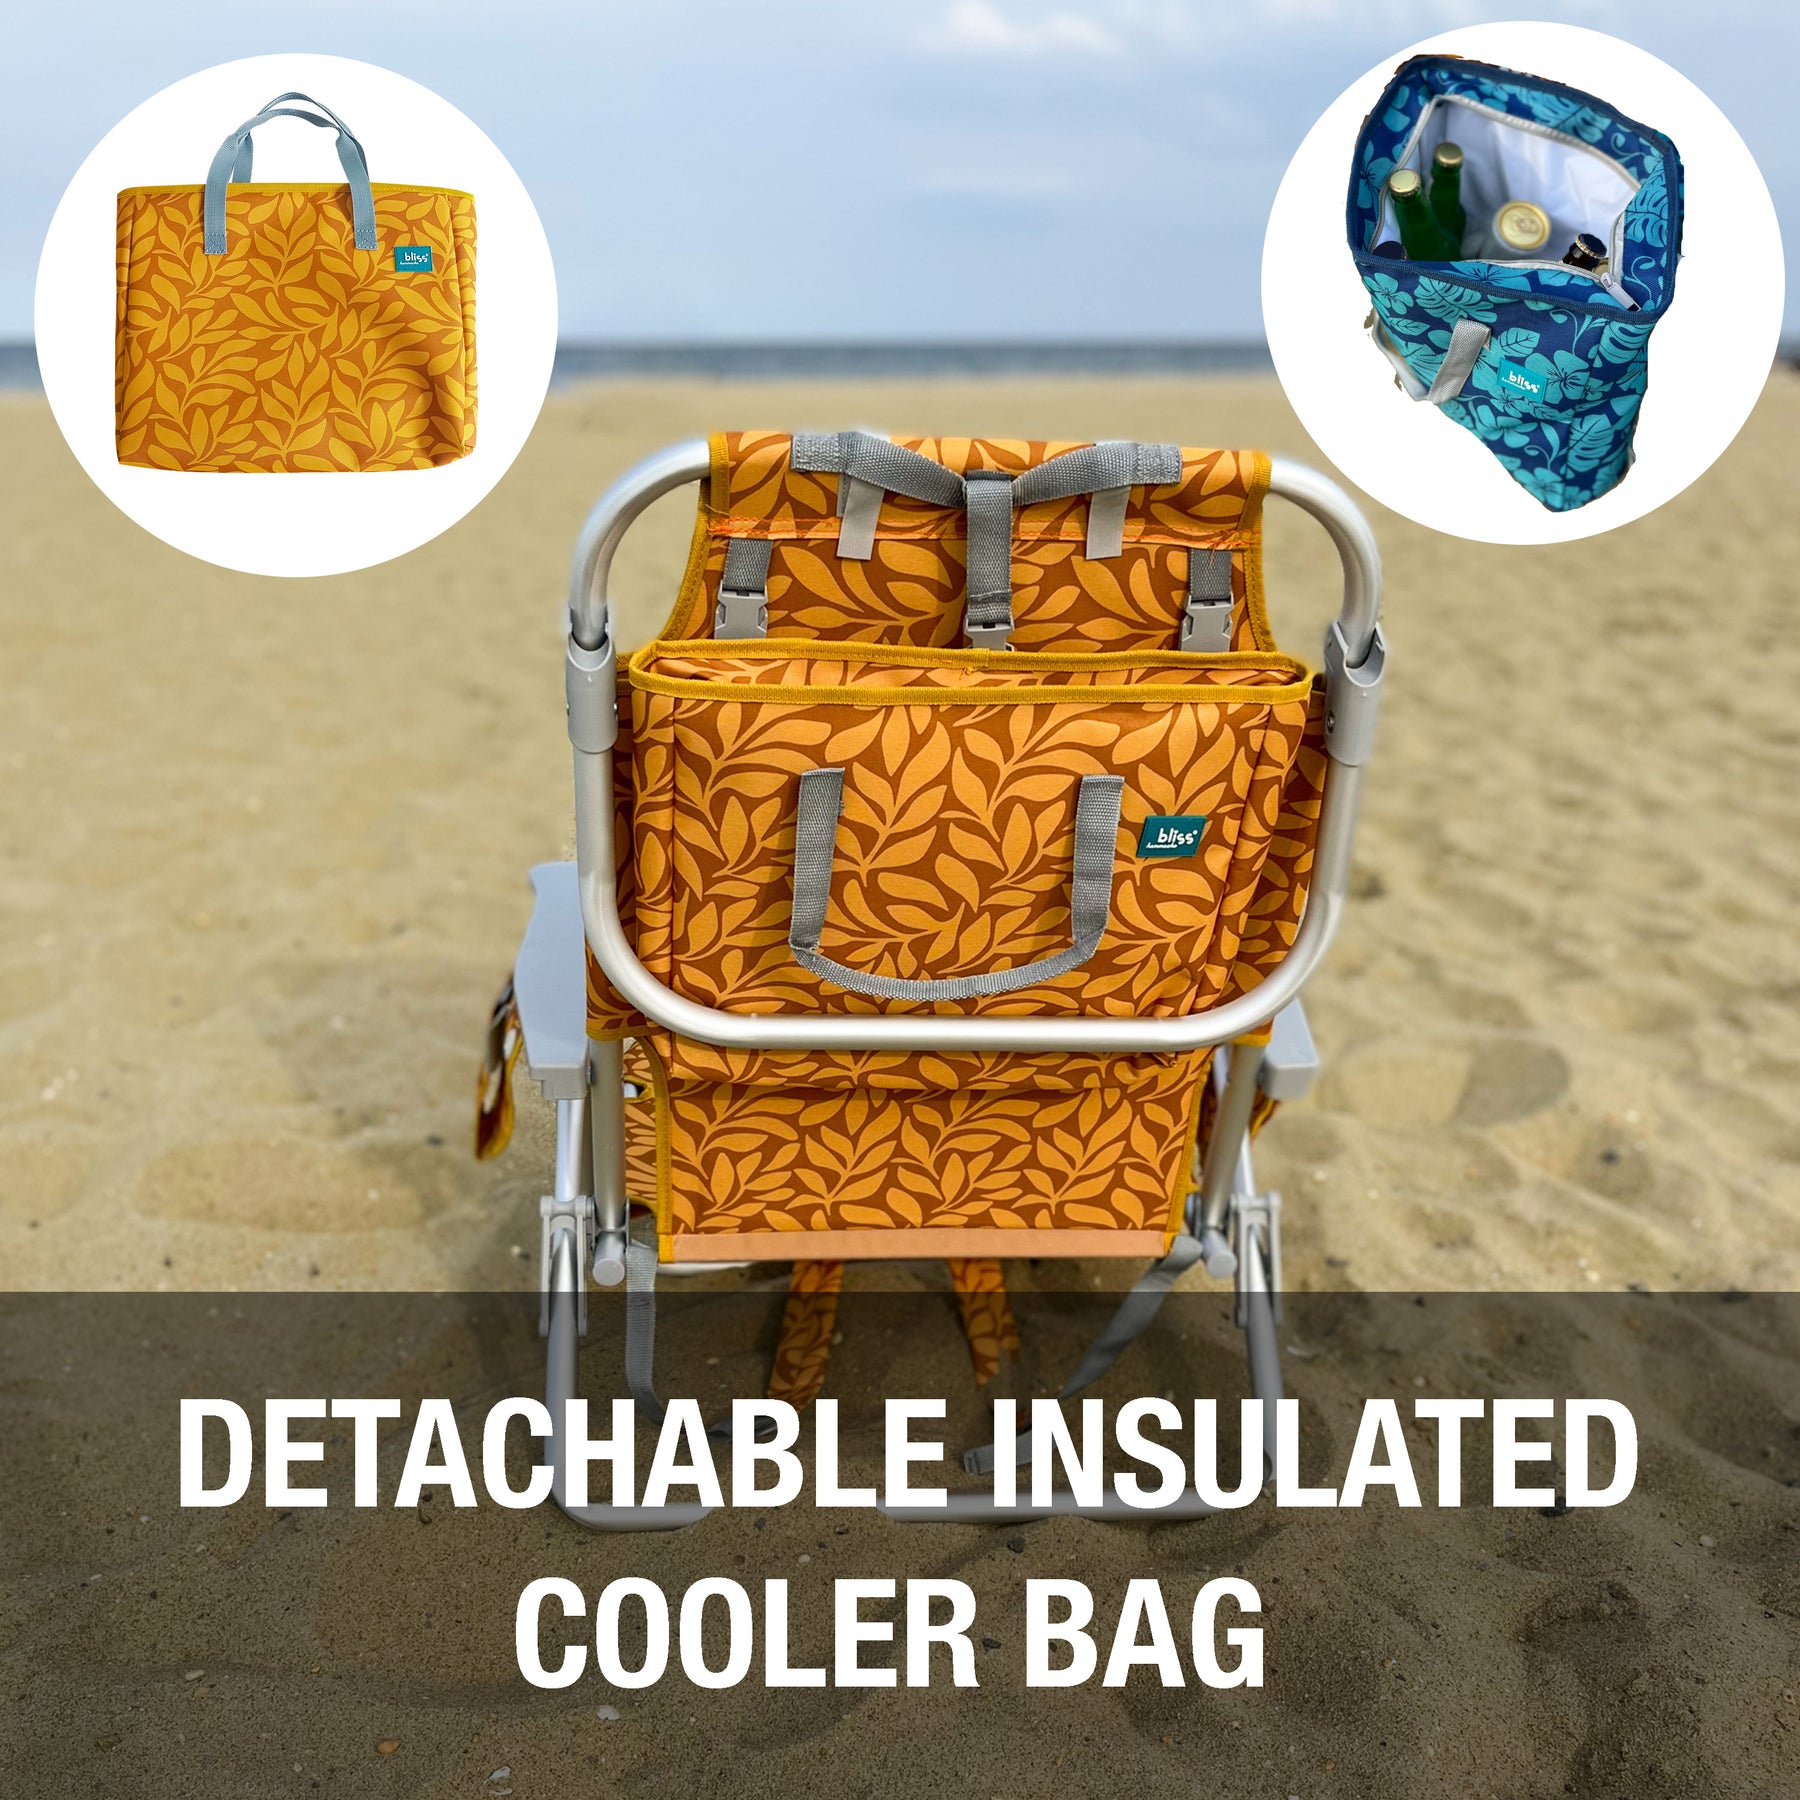 Bliss Hammocks Backpack Aluminum Beach Chair comes with a detachable insulated cooler bag.